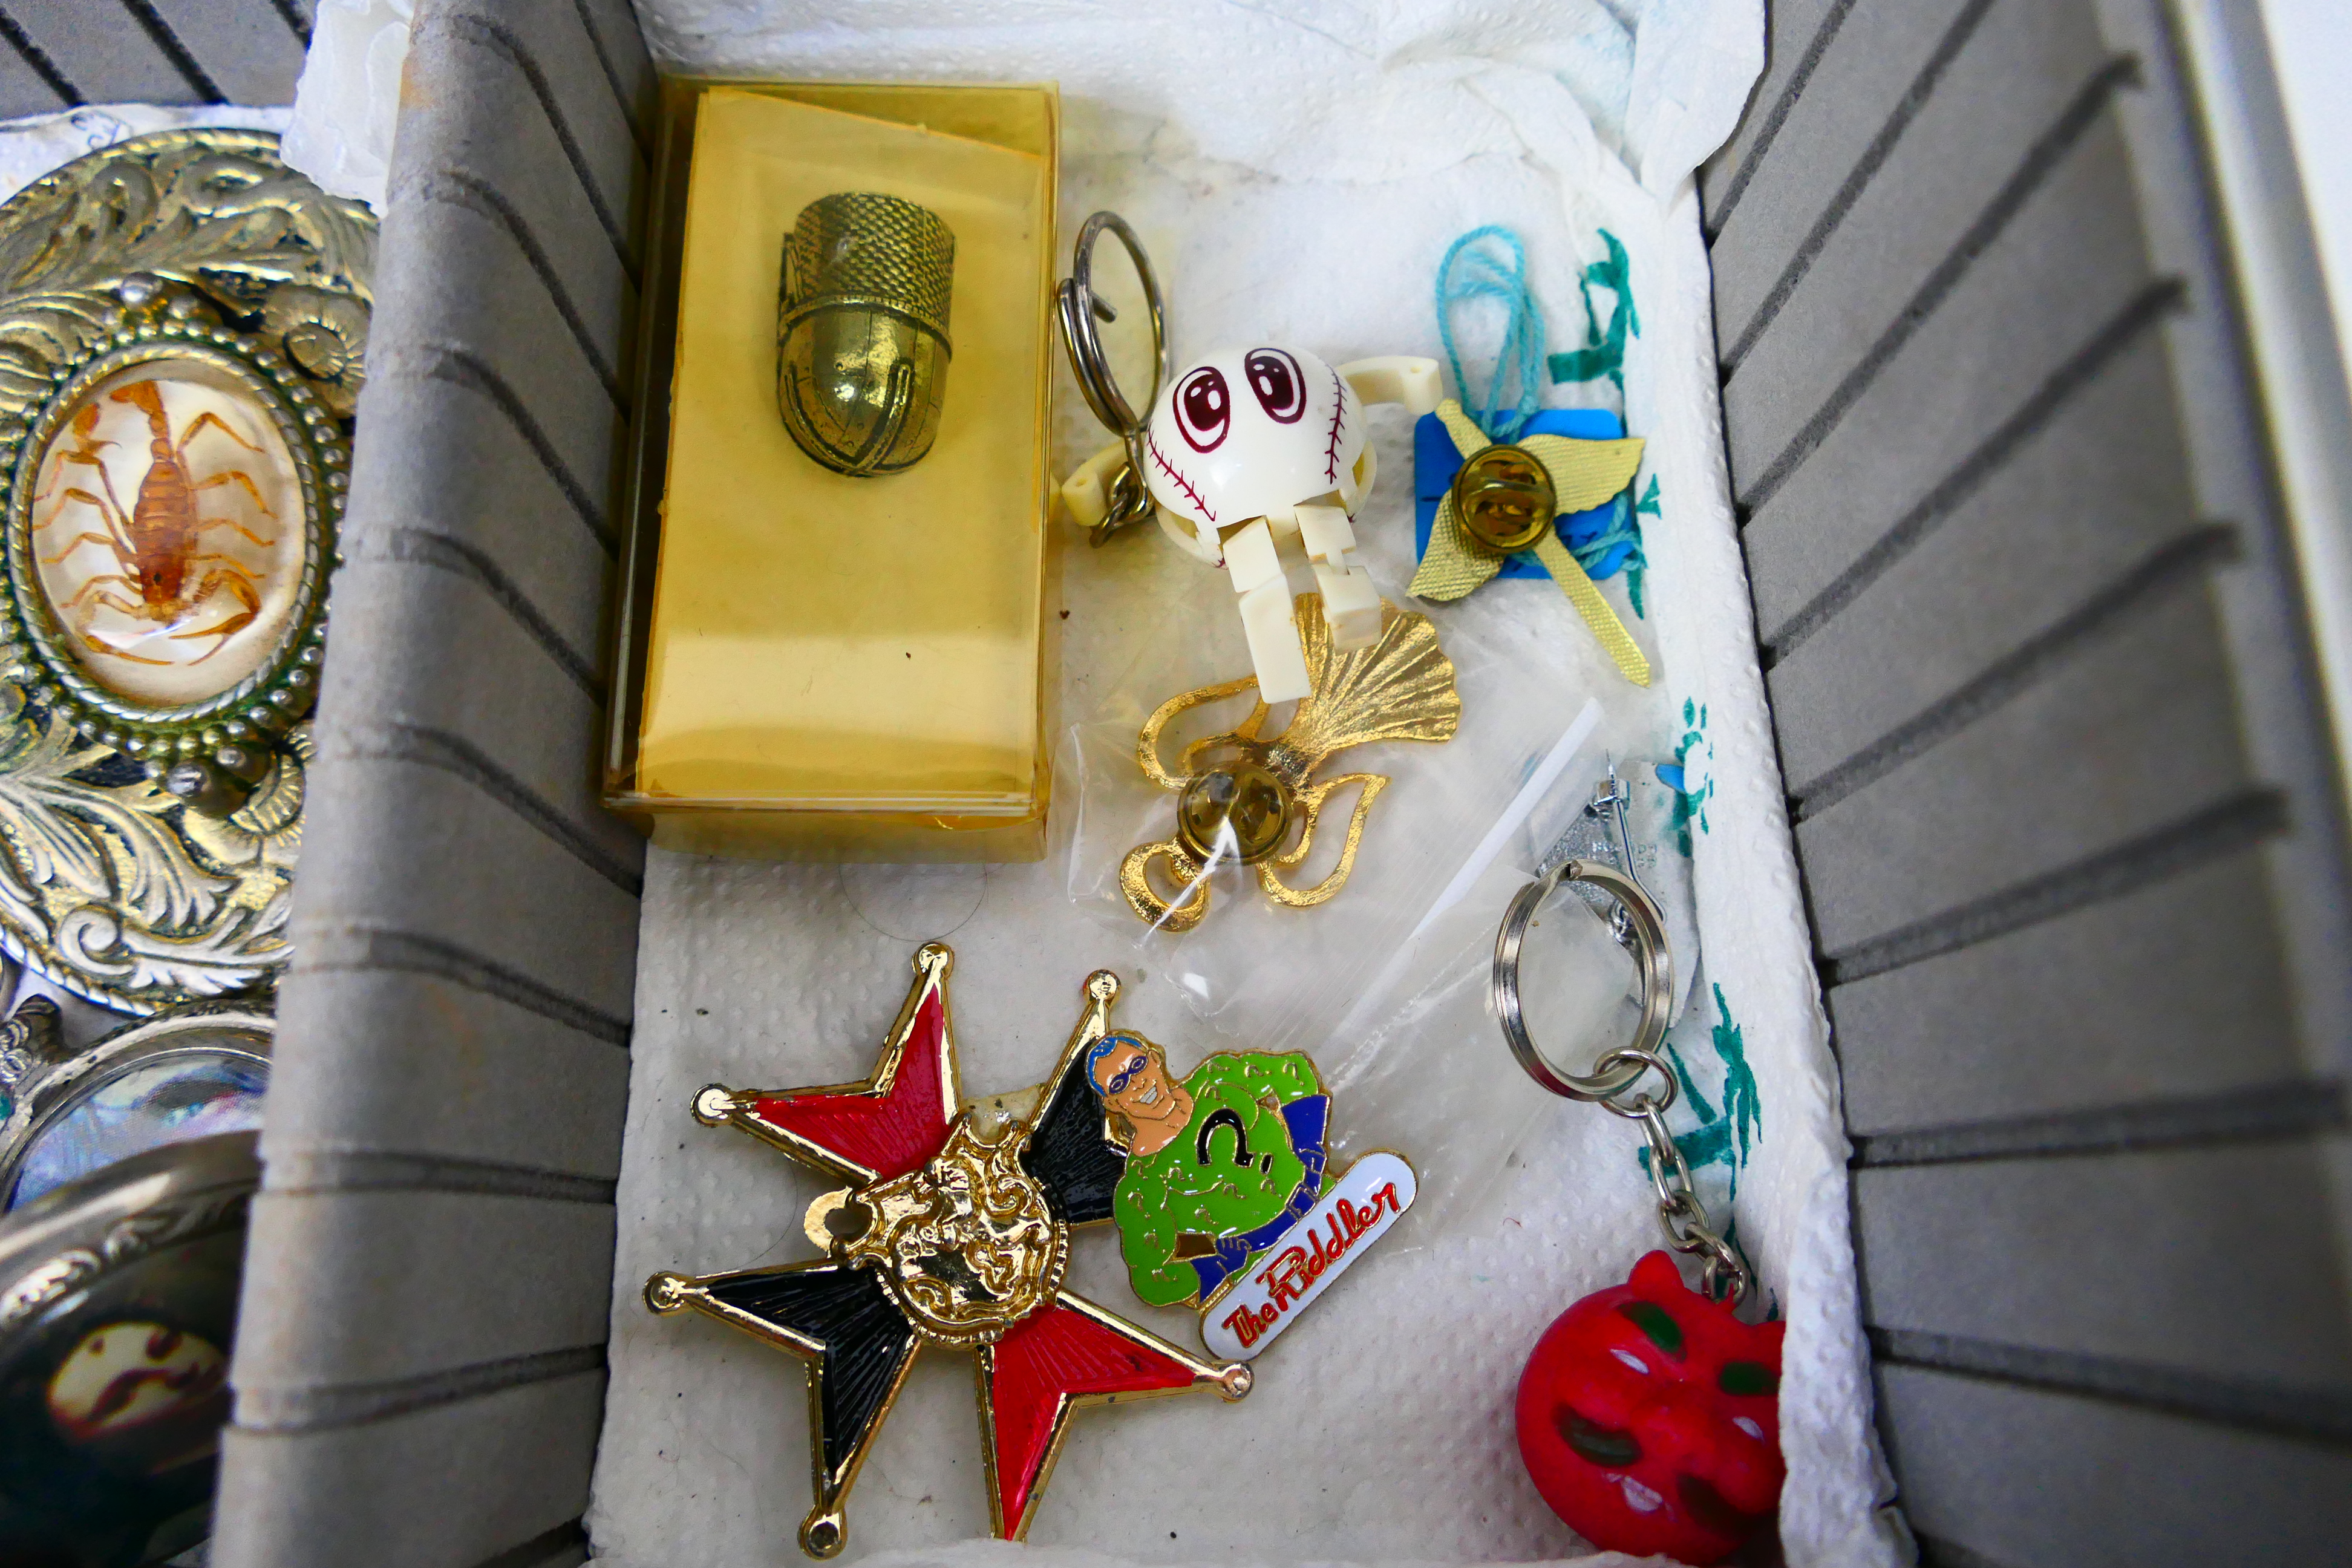 An aluminium case containing mixed collectables to include watches, sunglasses, belt buckles, - Image 8 of 8